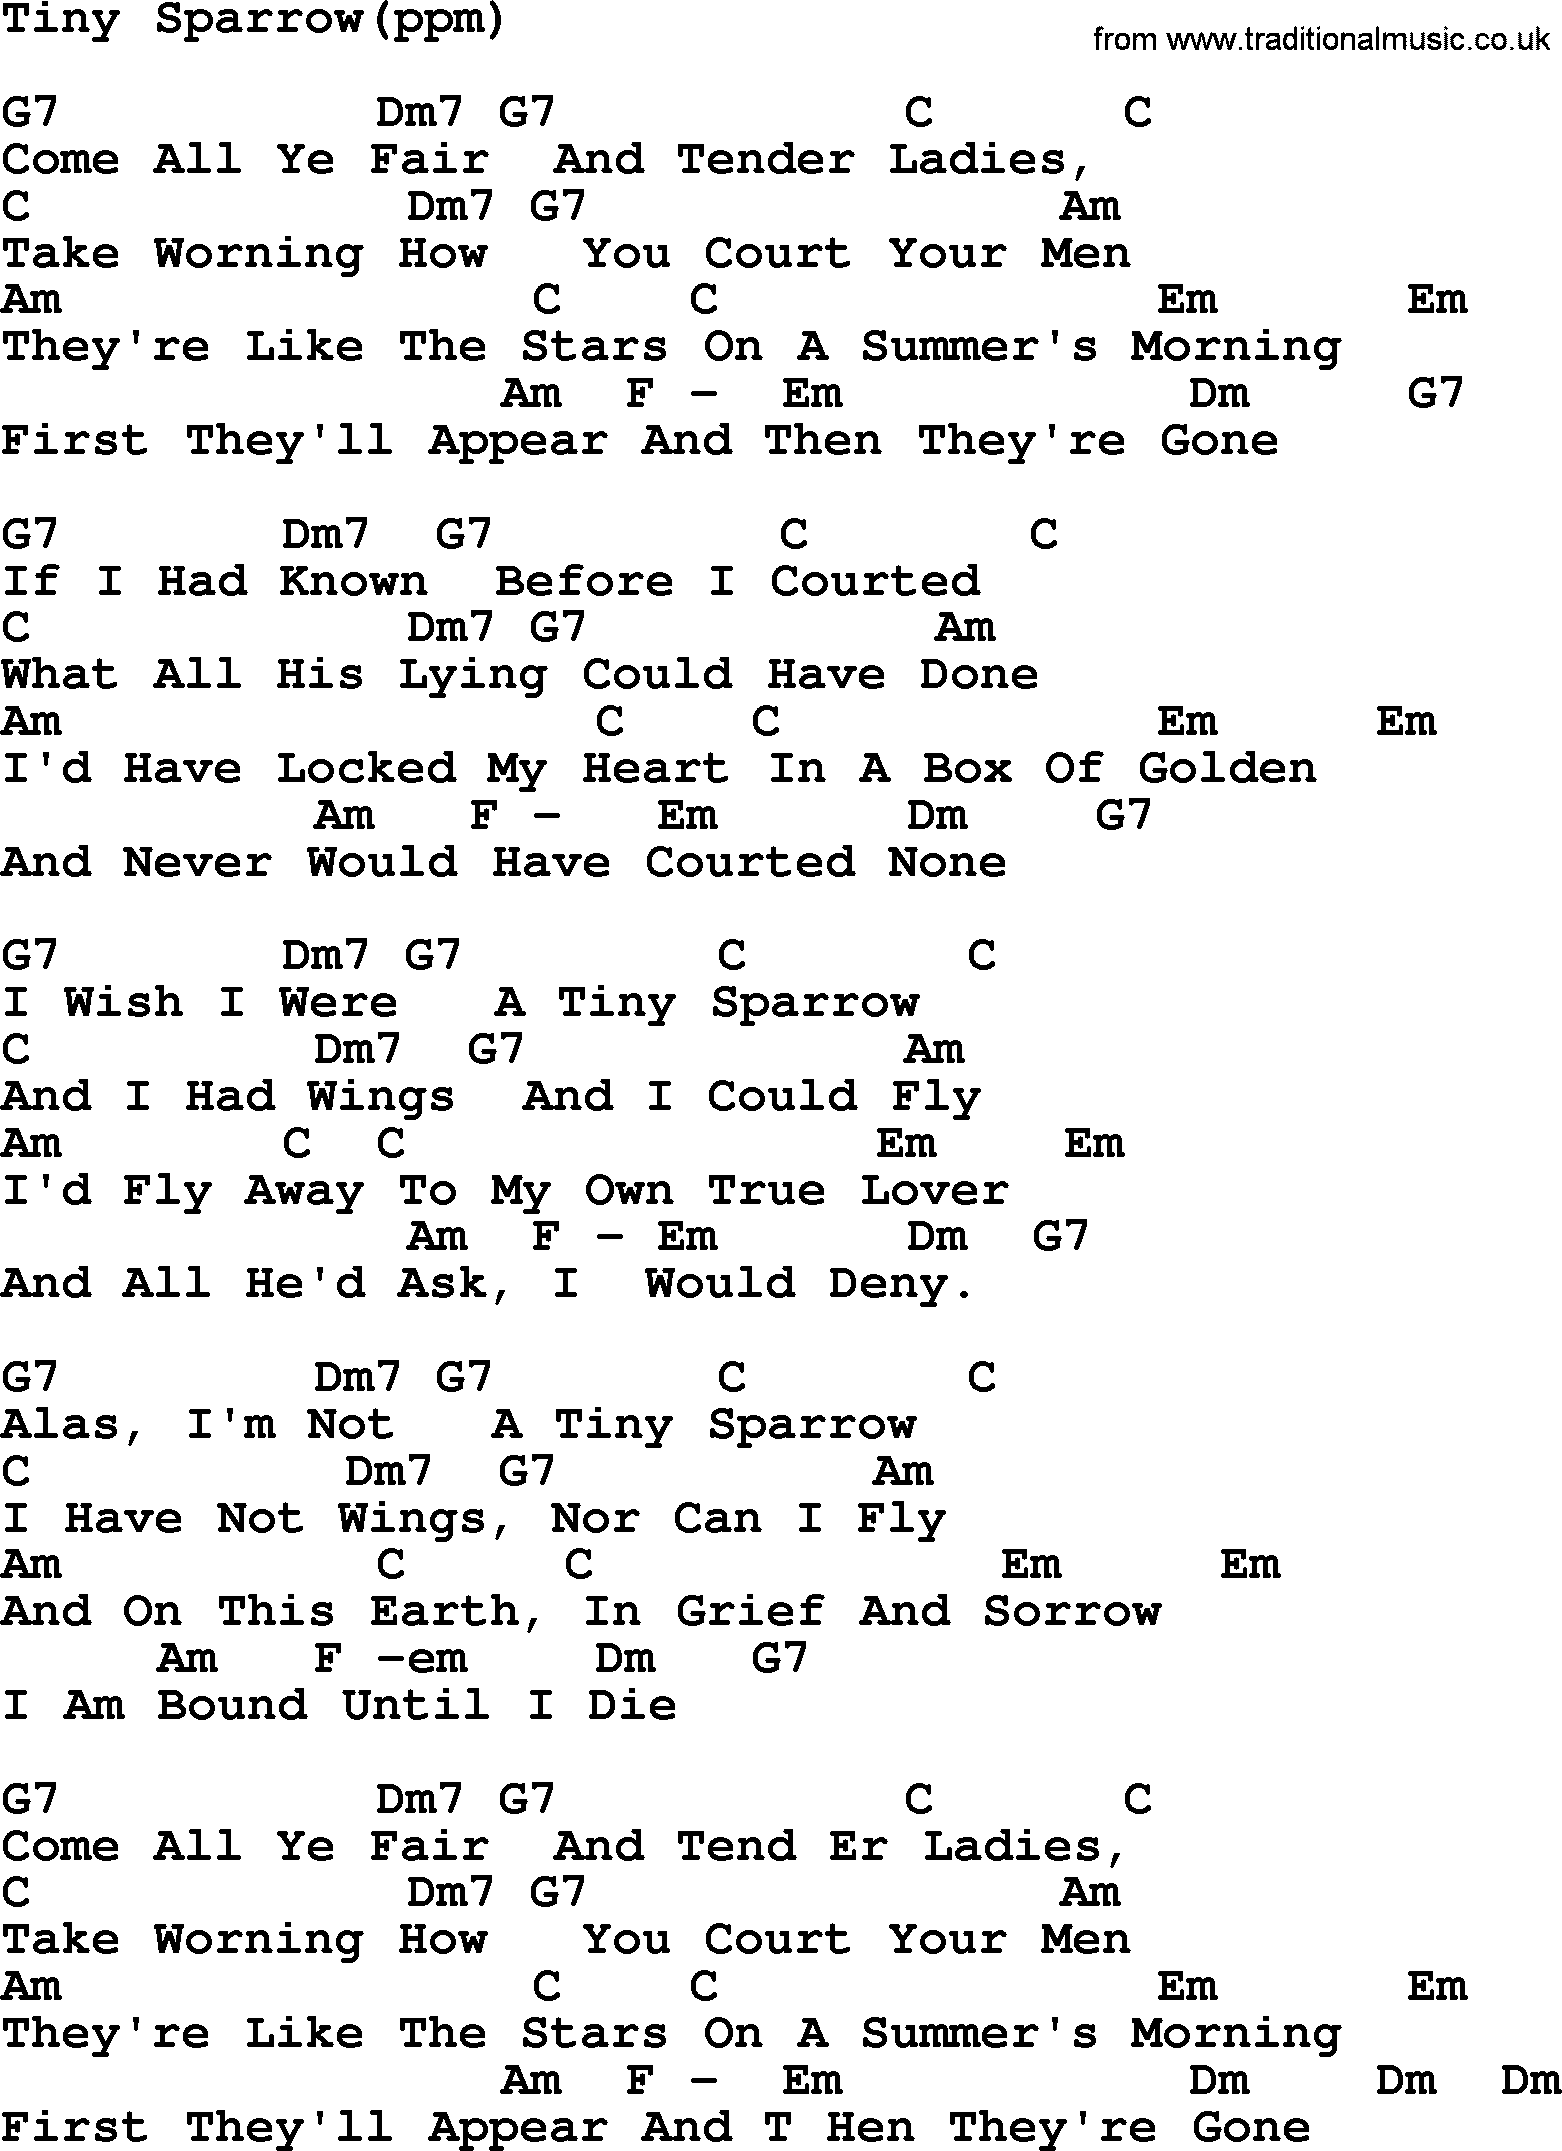 Peter, Paul and Mary song Tiny Sparrow, lyrics and chords